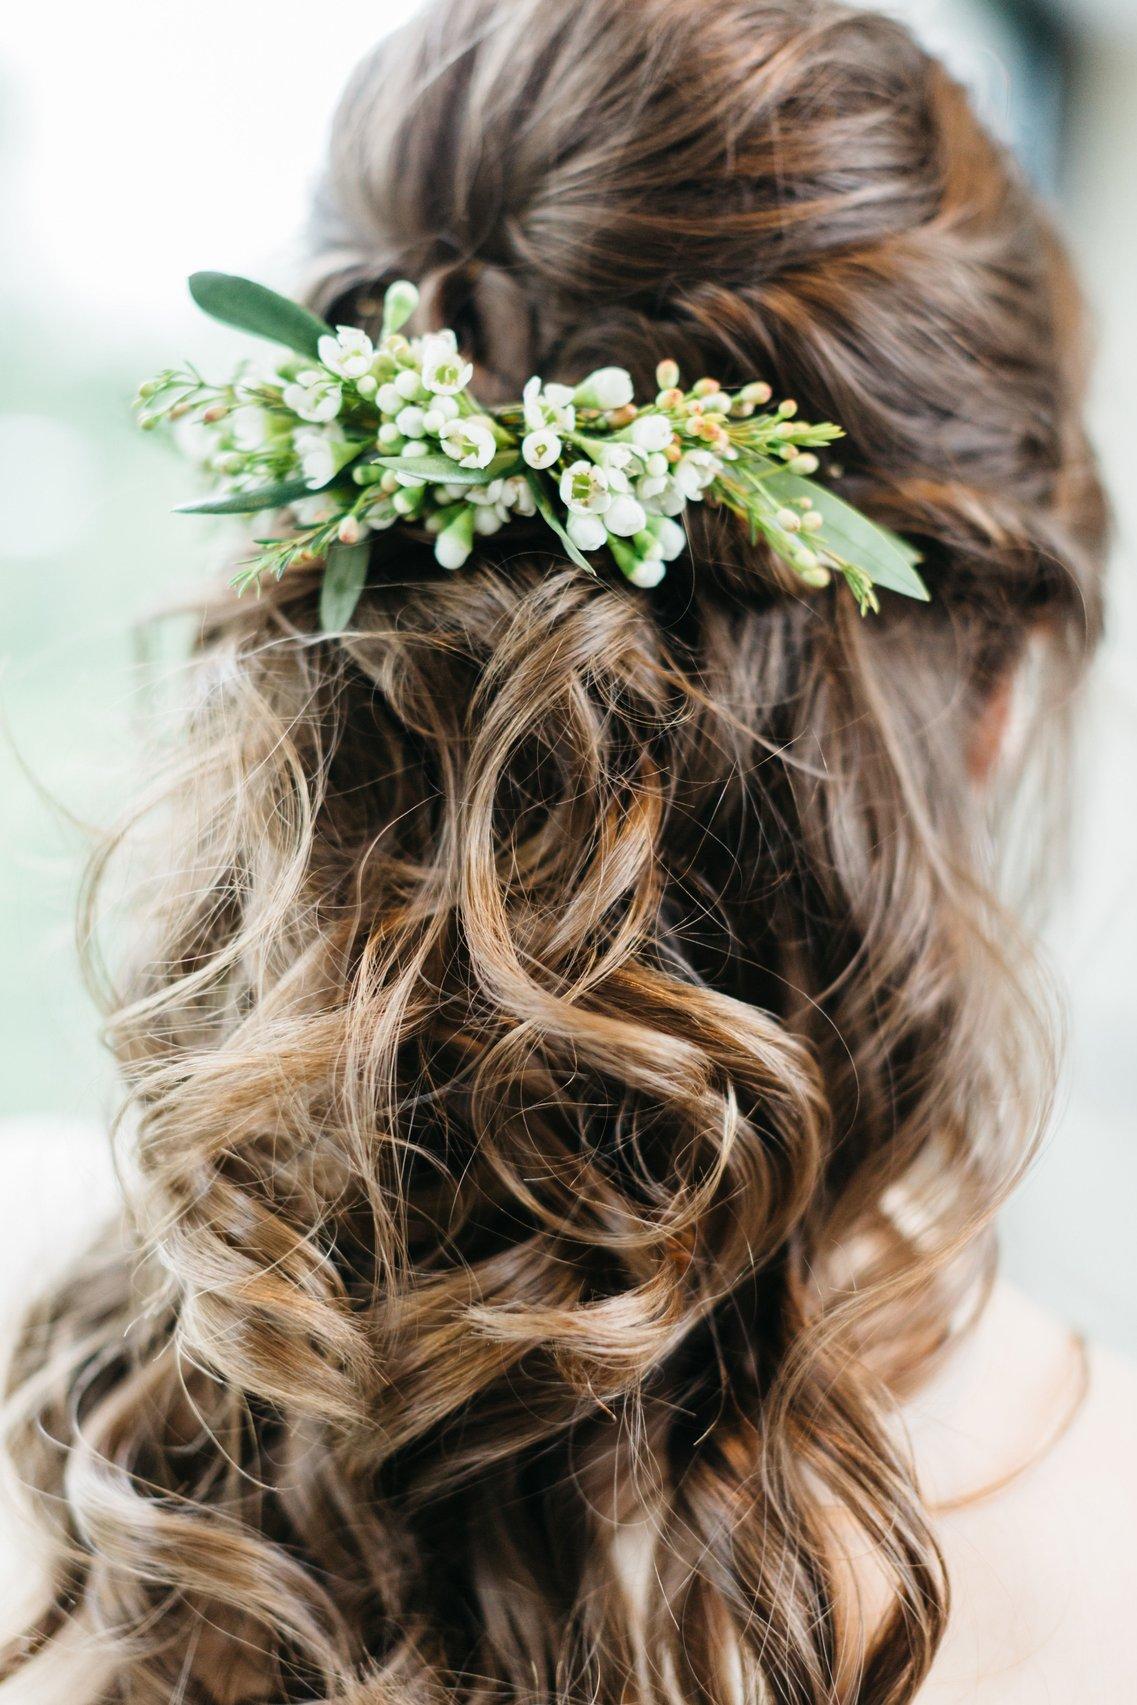 How to Feature Flowers in your Wedding Hairstyle